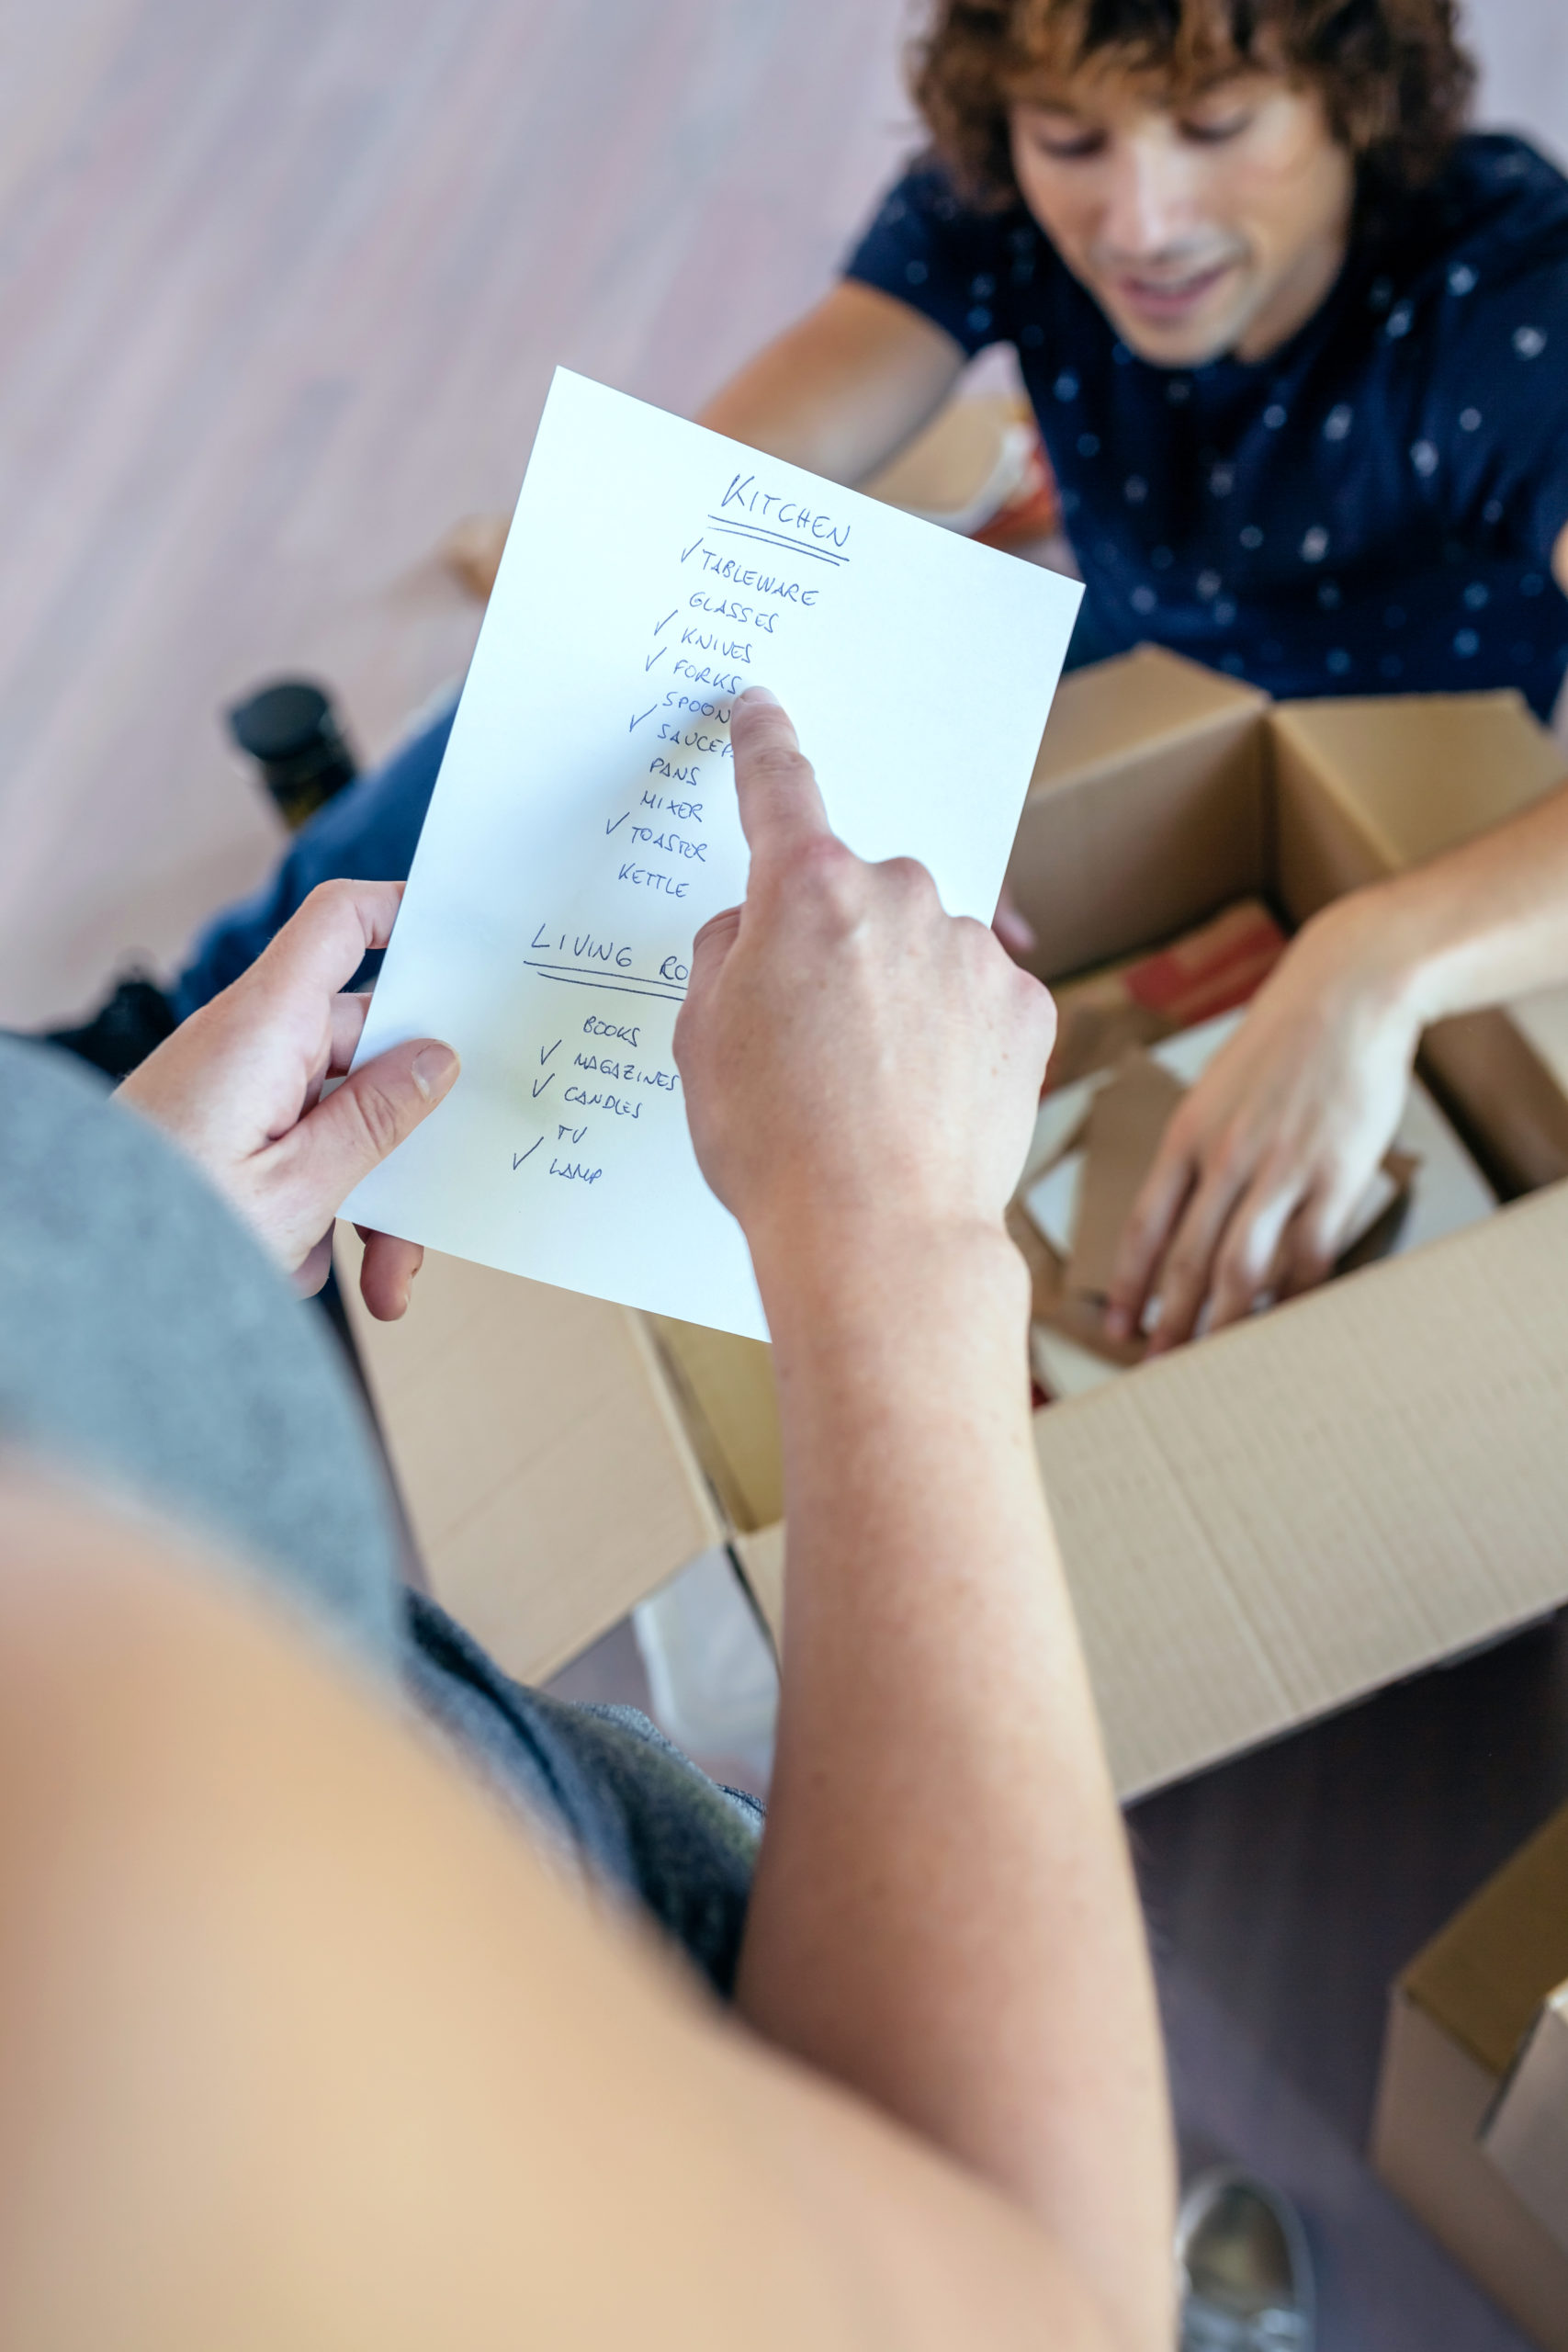 10 Moving Tips That Will Make Your Life Easier